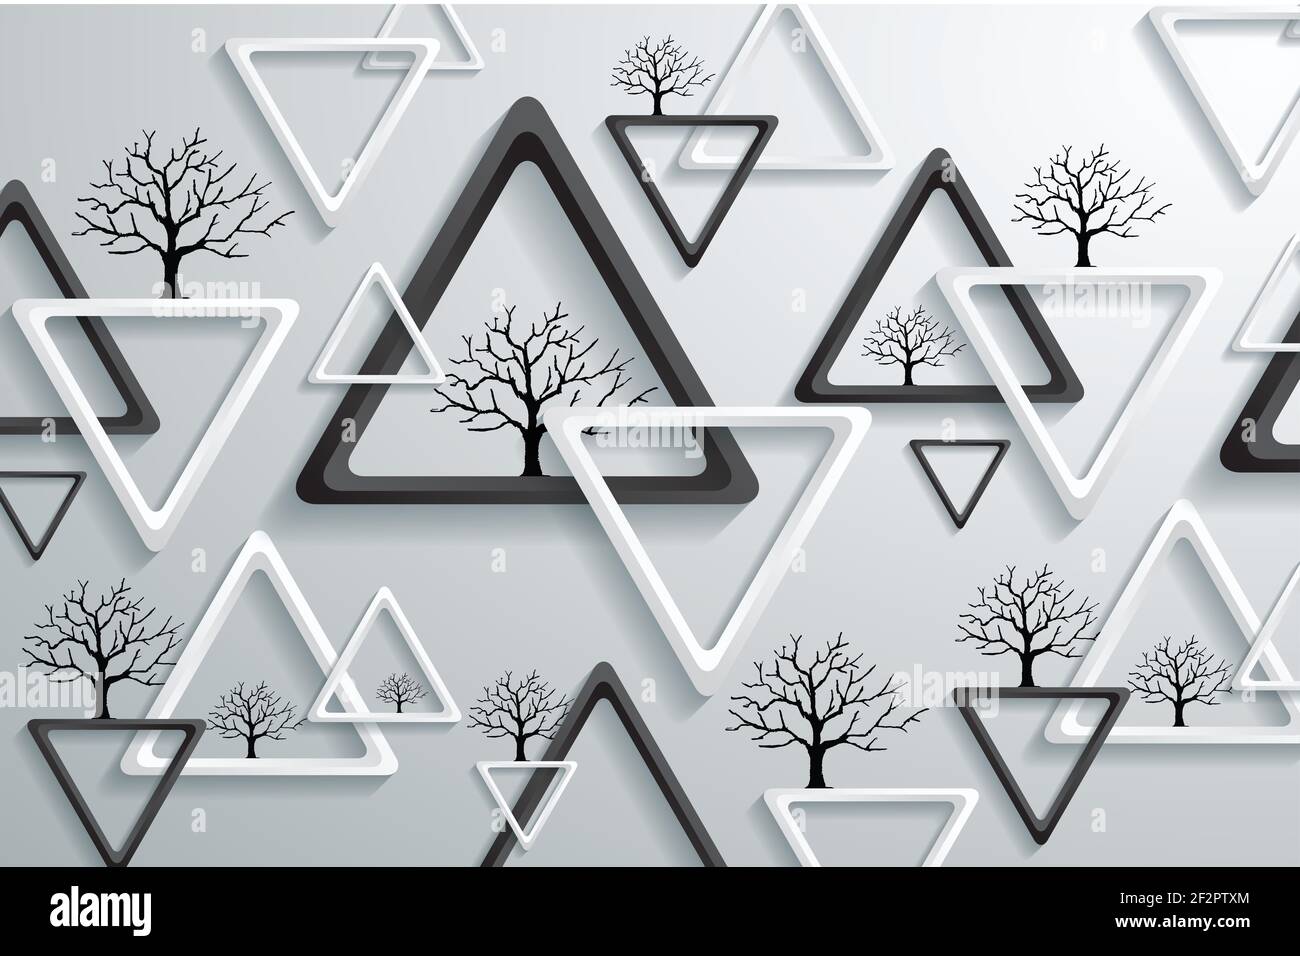 Custom wallpaper of black and white triangle with blacked tree photo mural wallpaper,3d illustration Stock Photo